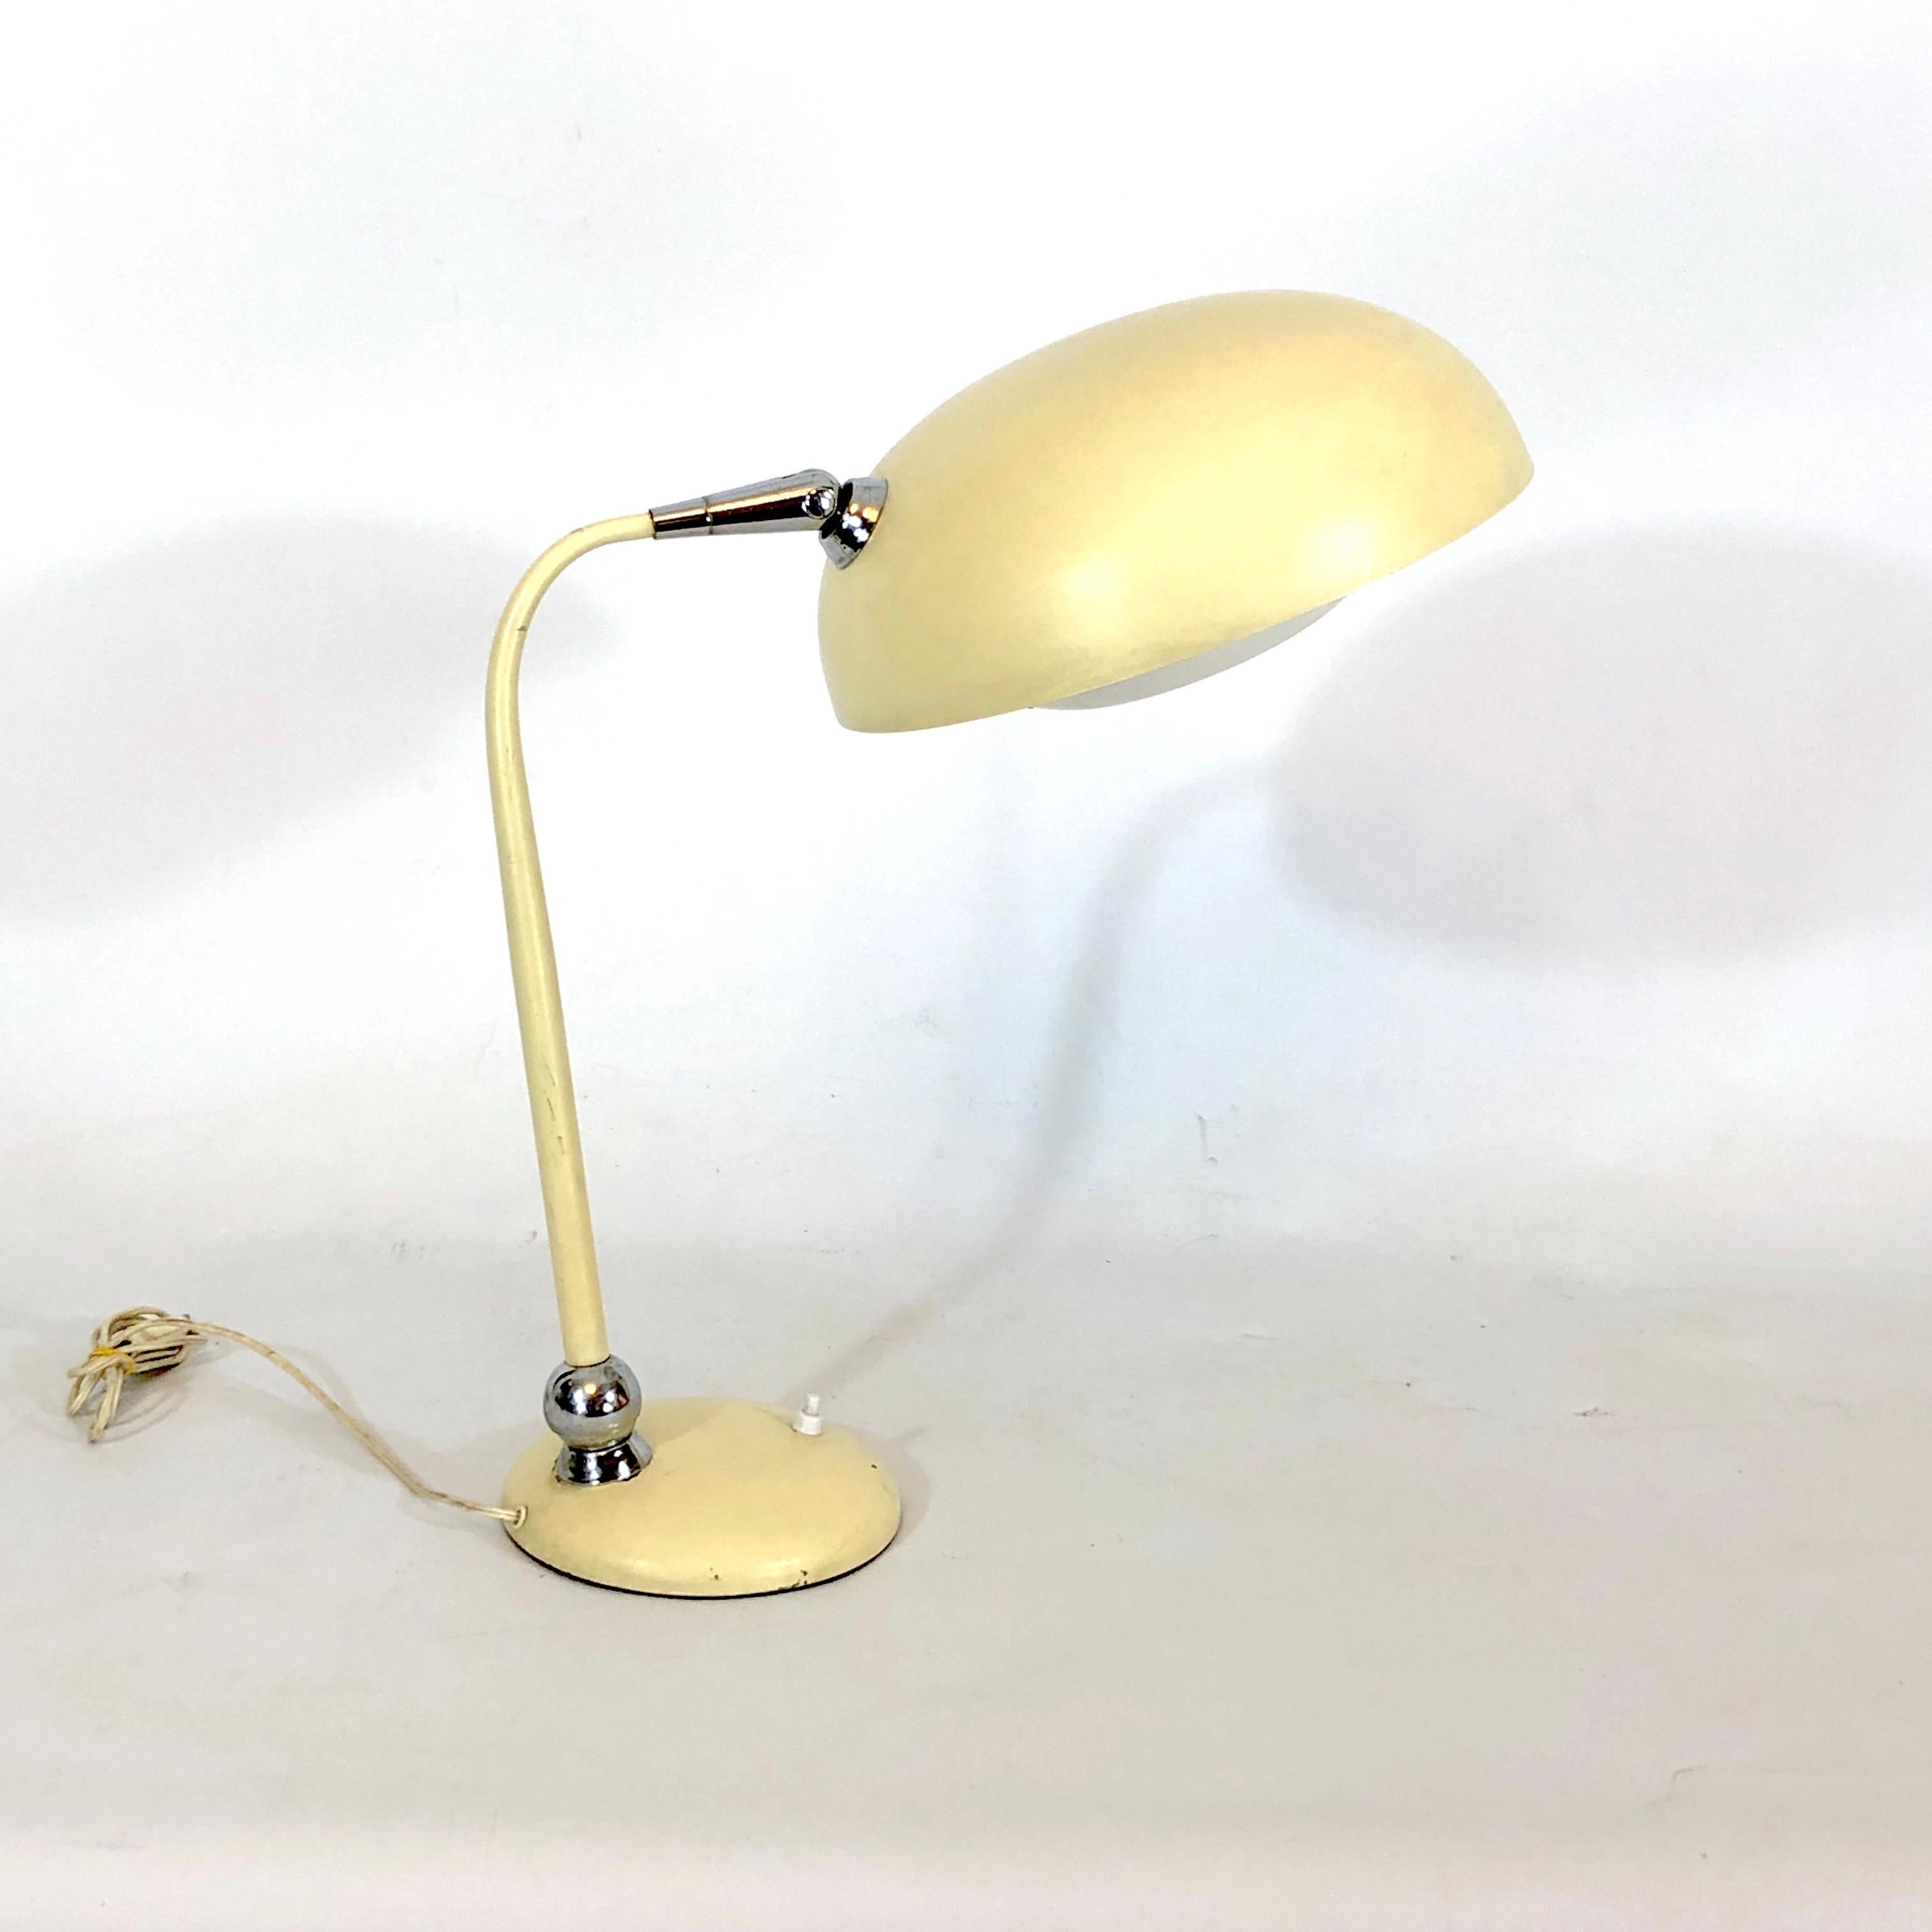 Good vintage condition with normal trace of age and use for this desk lamp produced by Stilnovo during the 50s. Very particular spheric joint on the base. Full working with EU standard, adaptable on demand for USA standard.